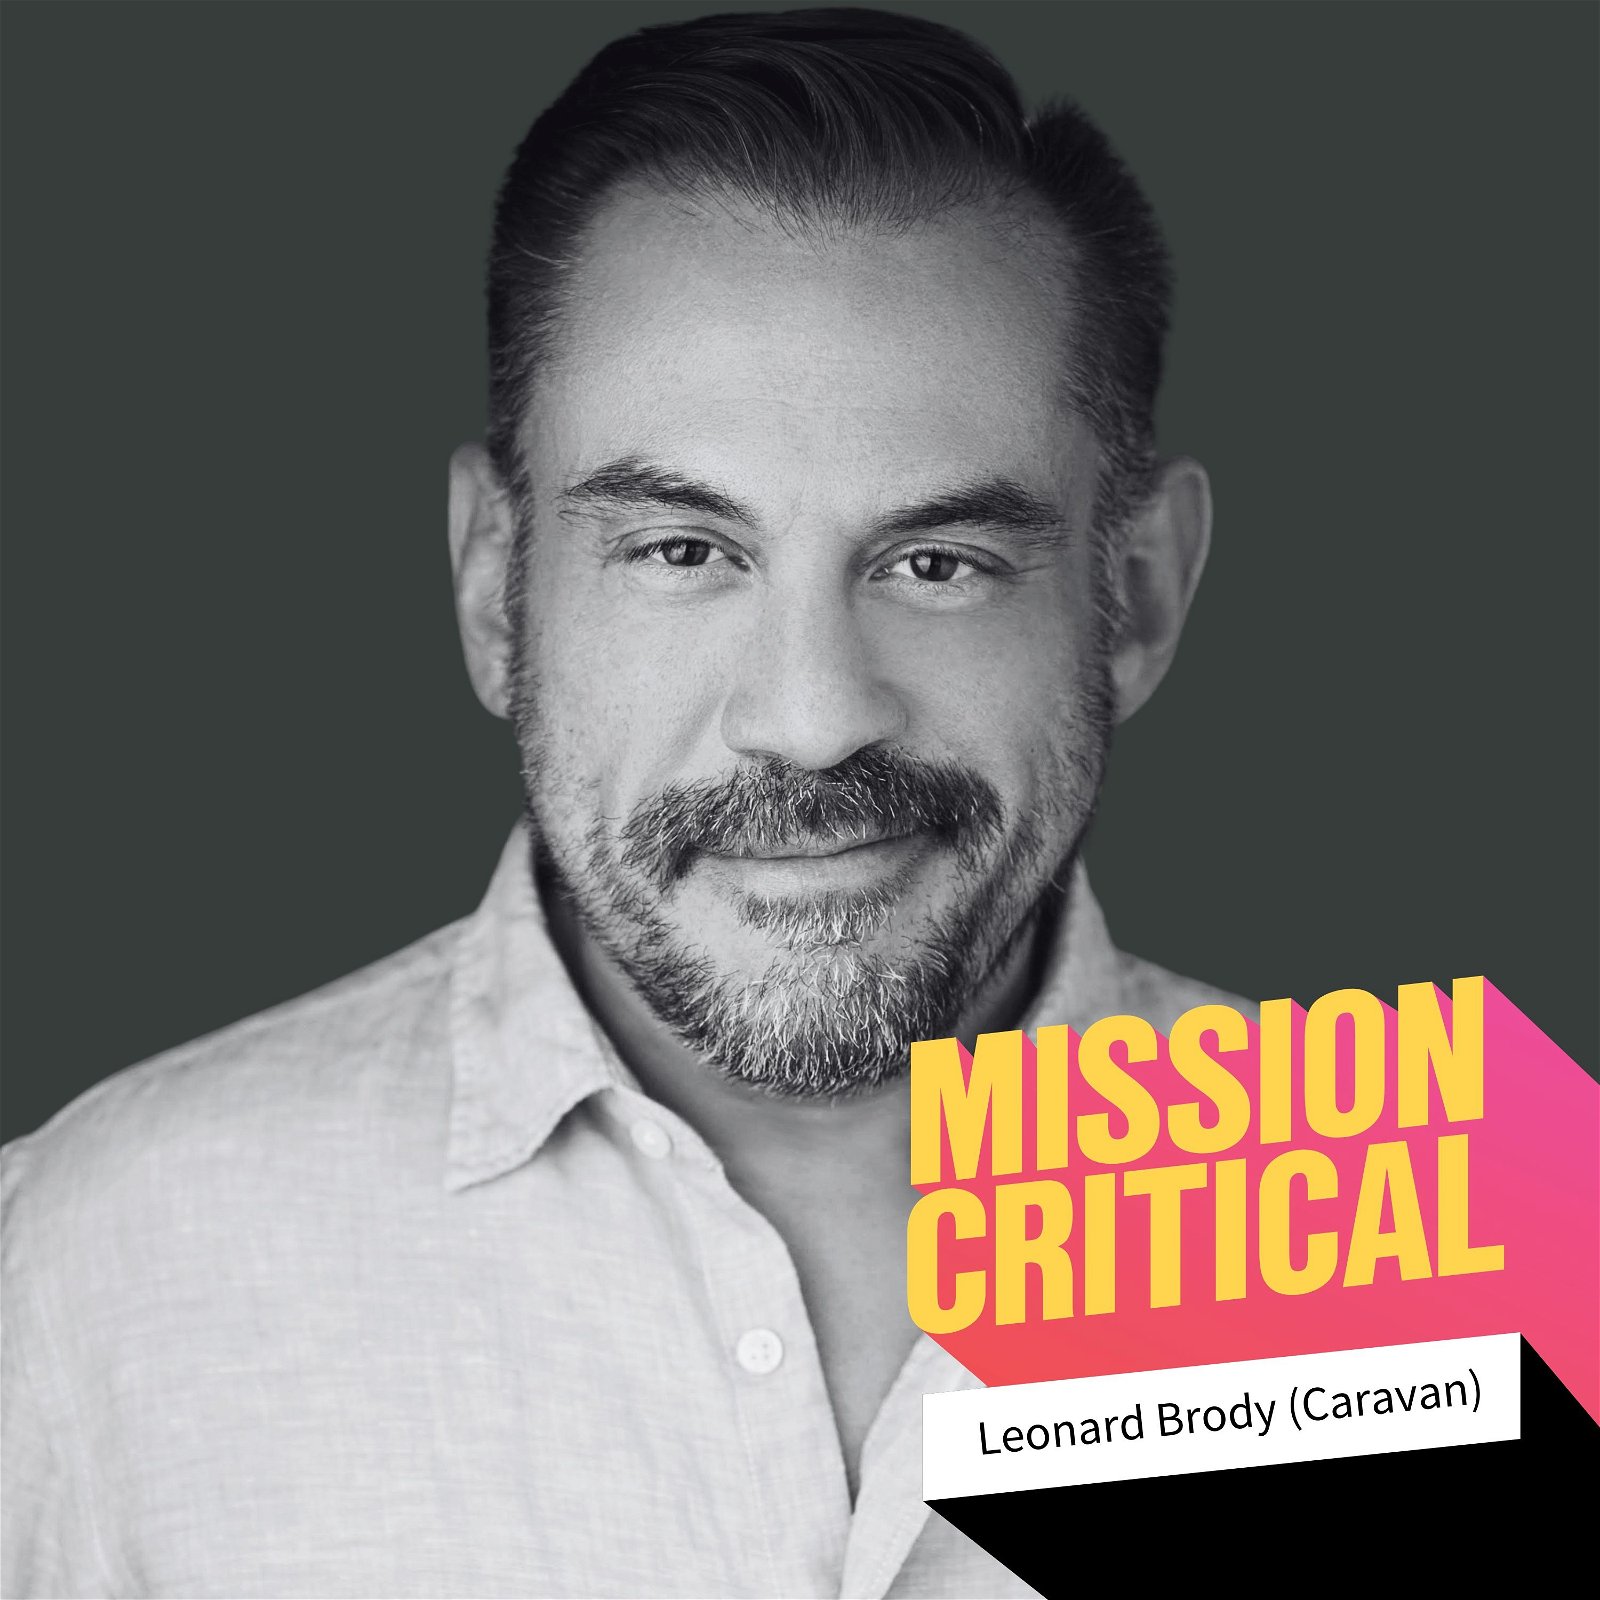 Leonard Brody (Co-founder, Caravan): Is a Celebrity Partnership Right for Your Brand?